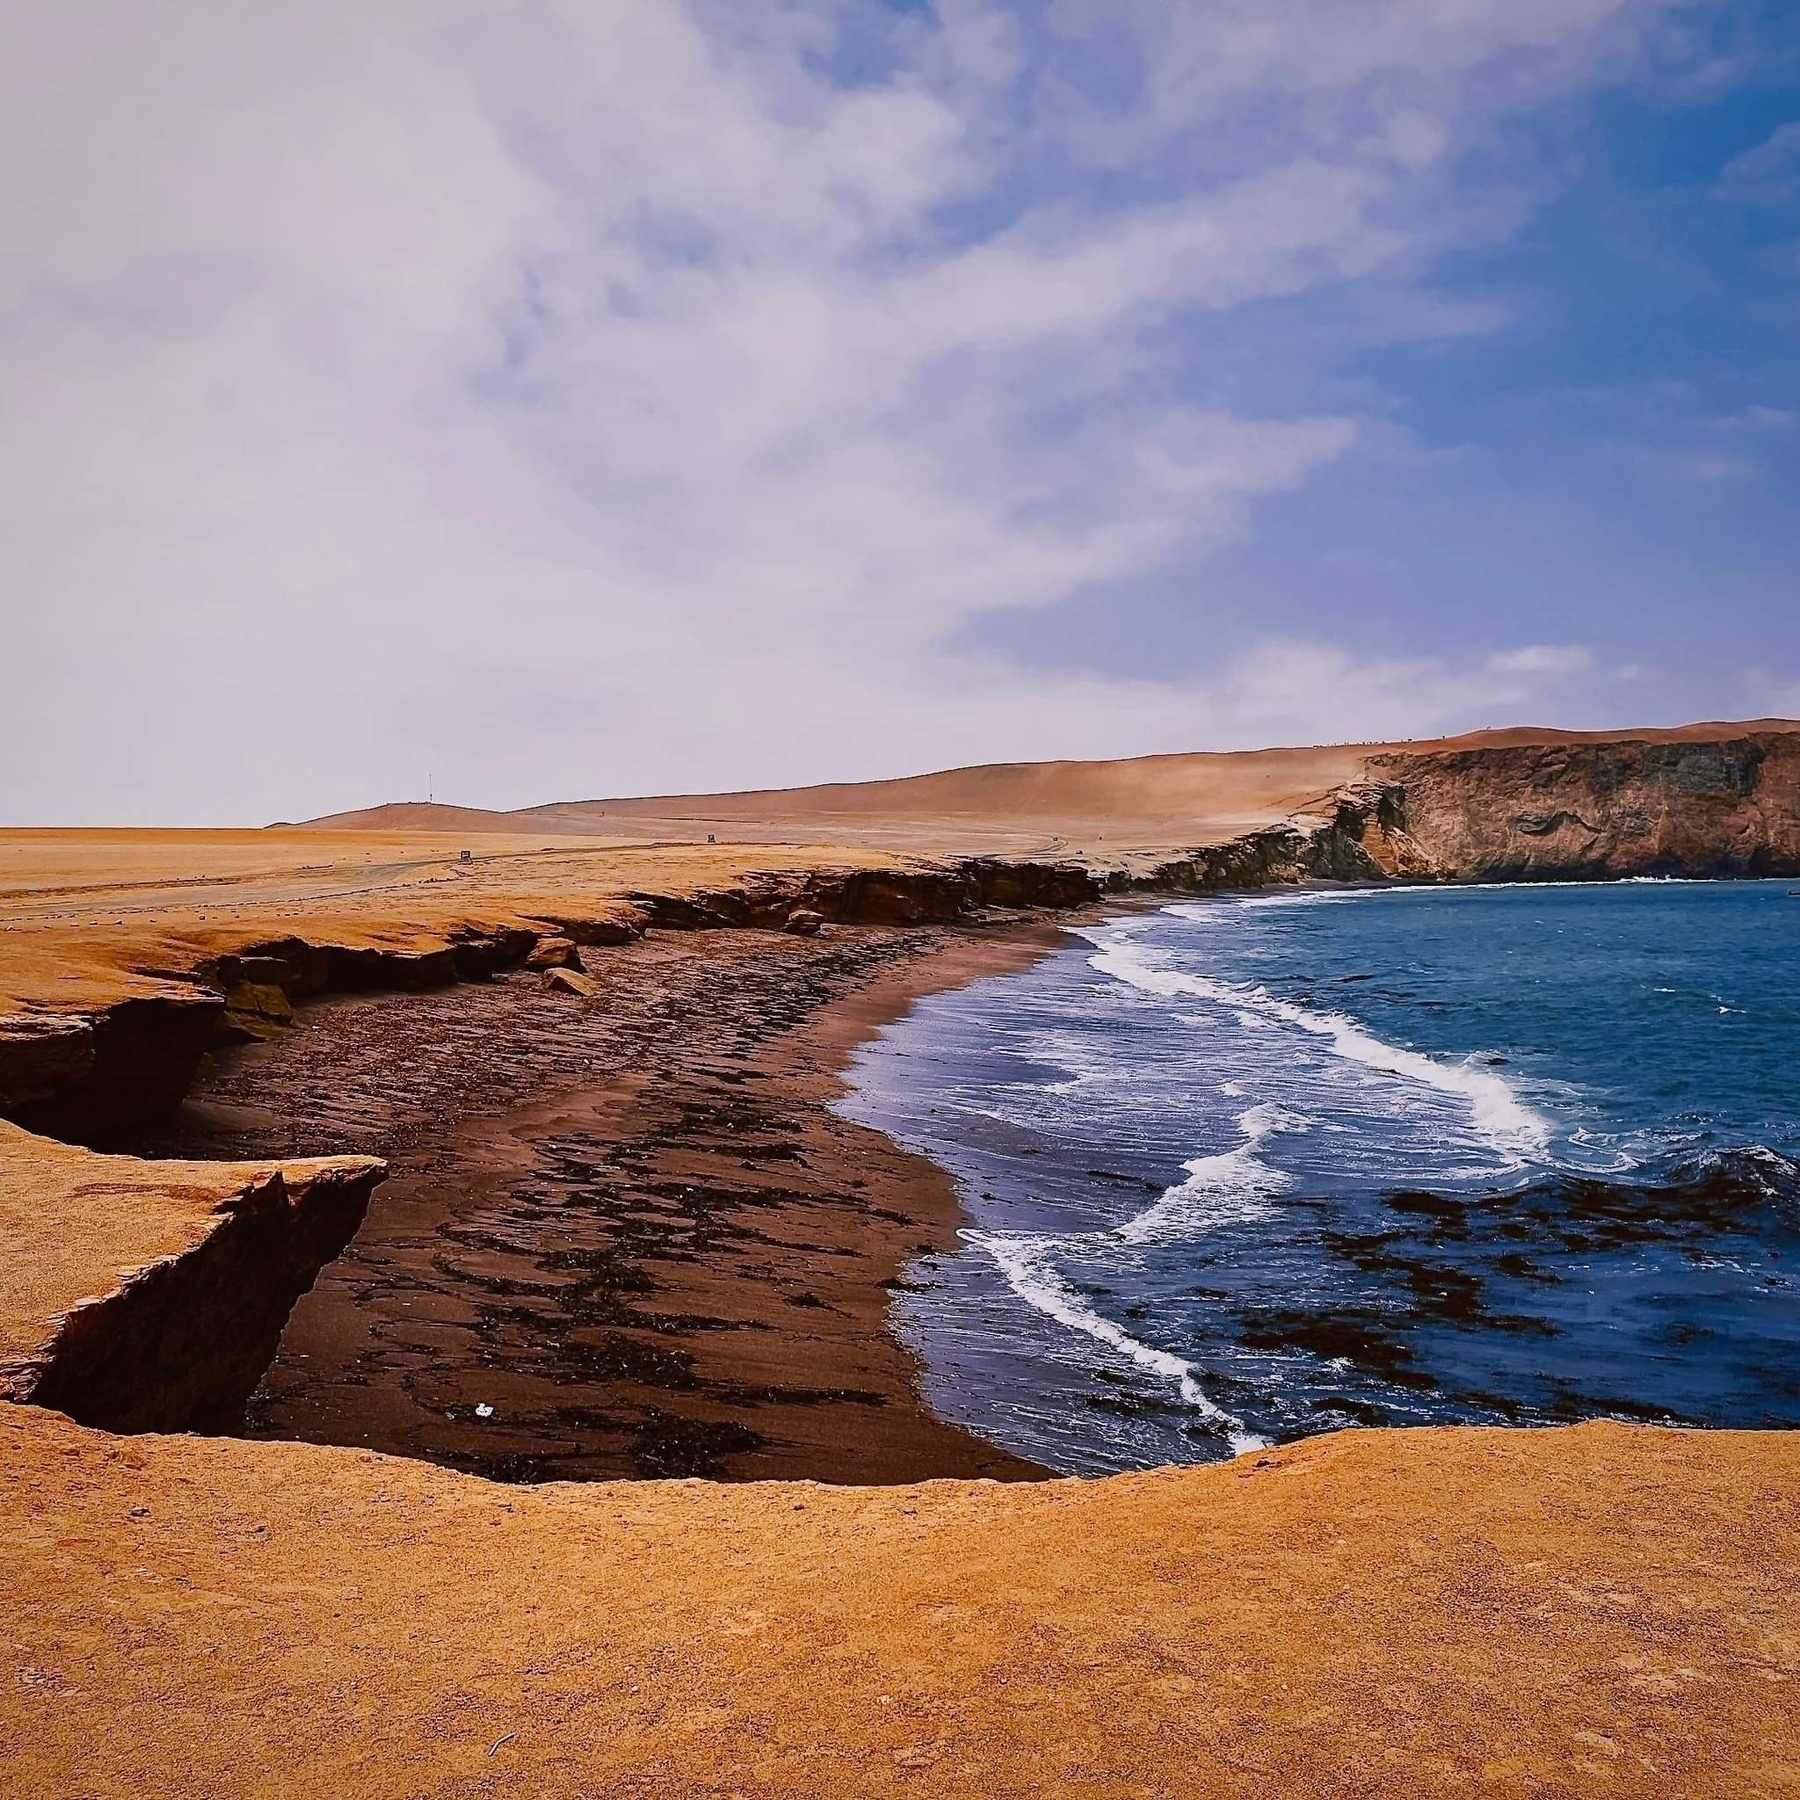 The red sand of Playa Roja contrasts beautifully with the blue waters.